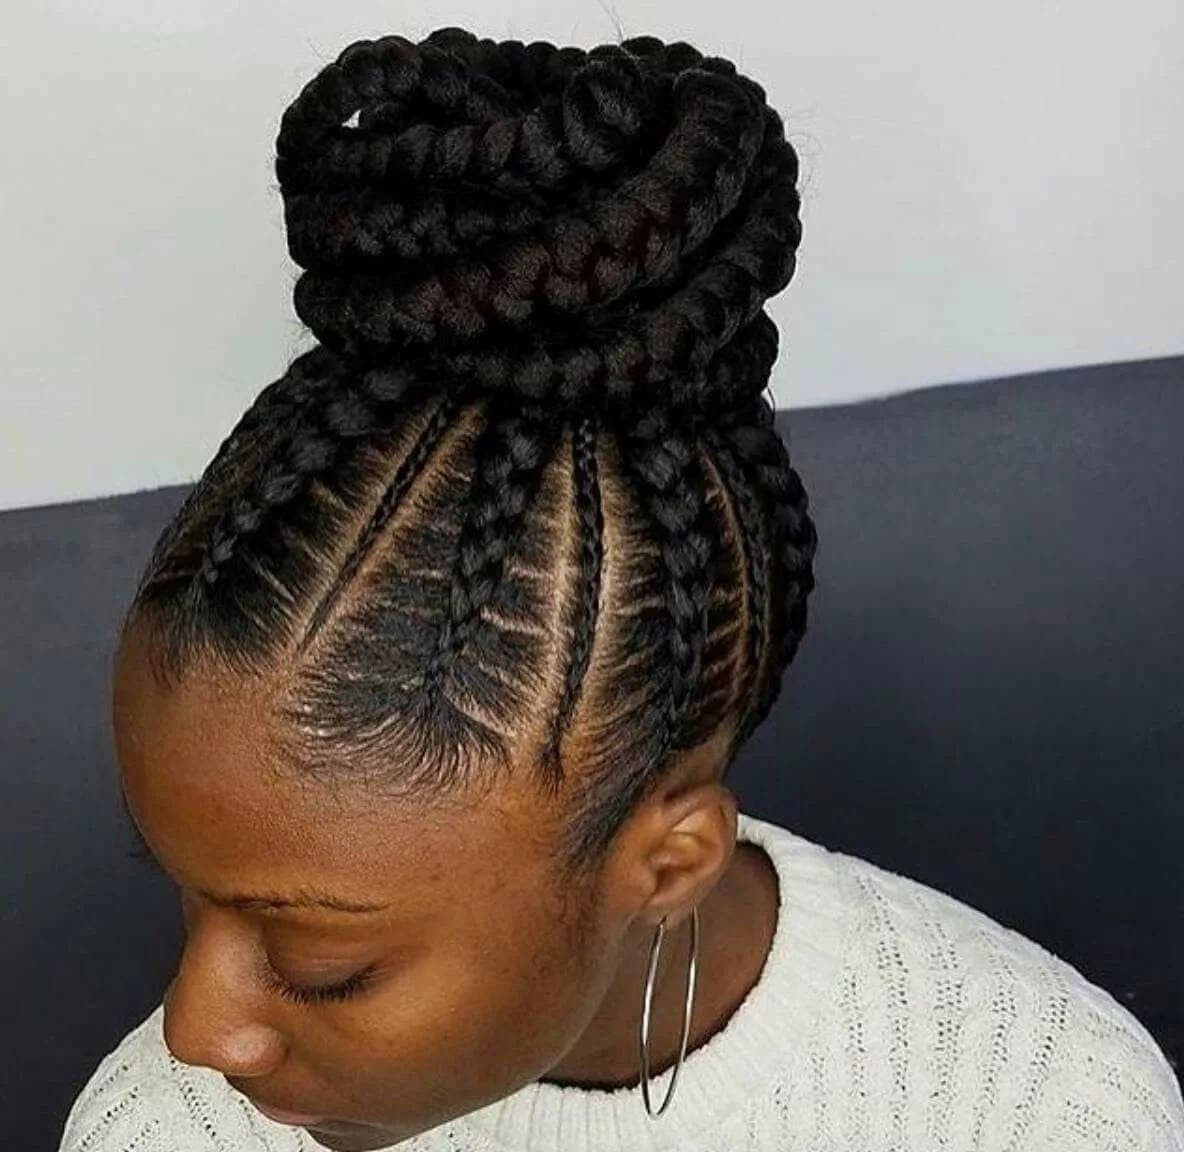 African Braids Hairstyles Pictures
 Top 10 African braiding hairstyles for la s PHOTOS